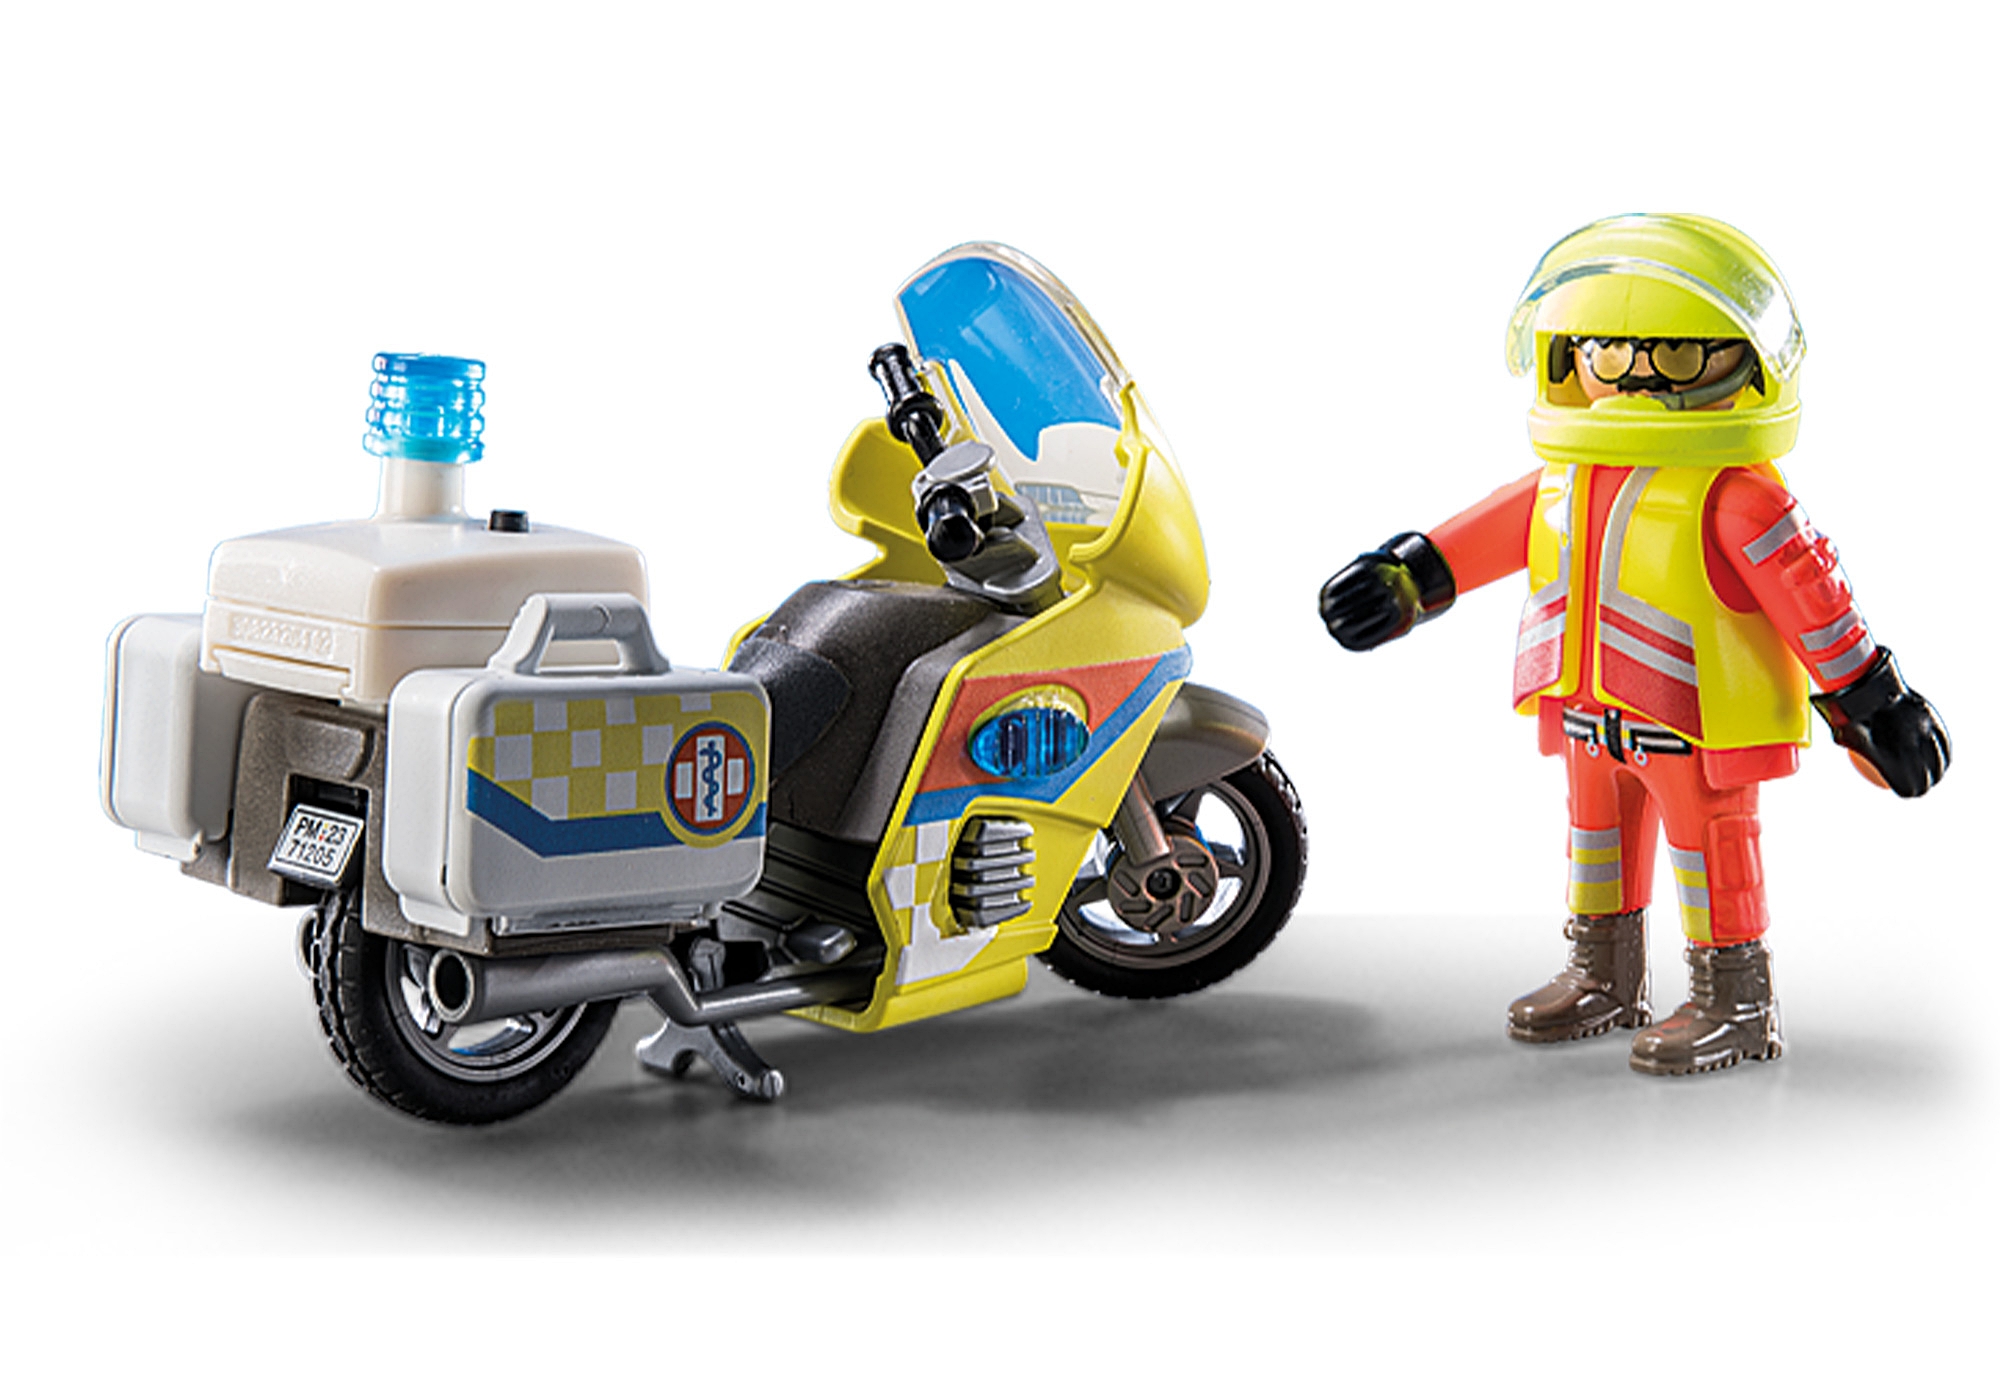 Playmobil City Life Rescue Motorcycle With Flashing Light Building Set  71205 